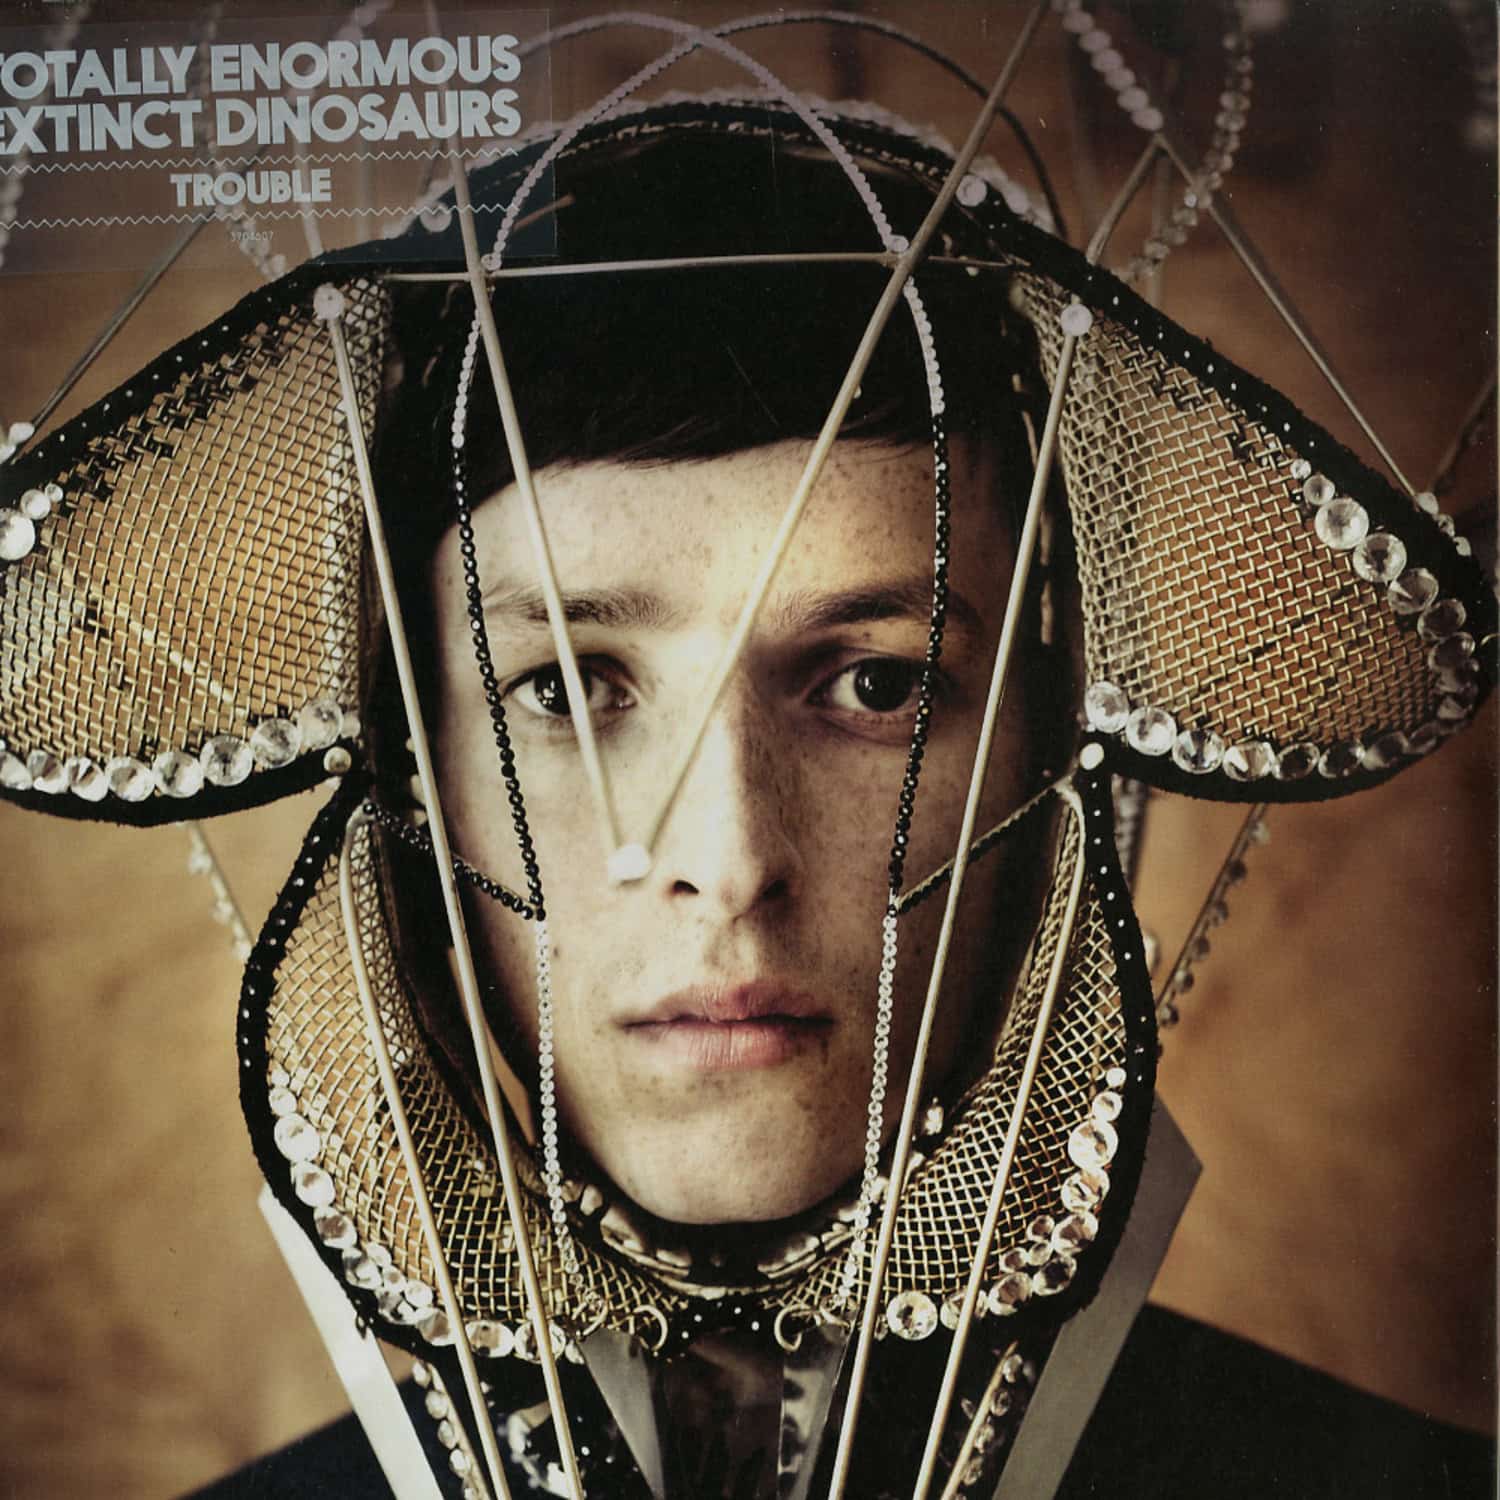 Totally Enormous Extinct Dinosaurs - TROUBLE 